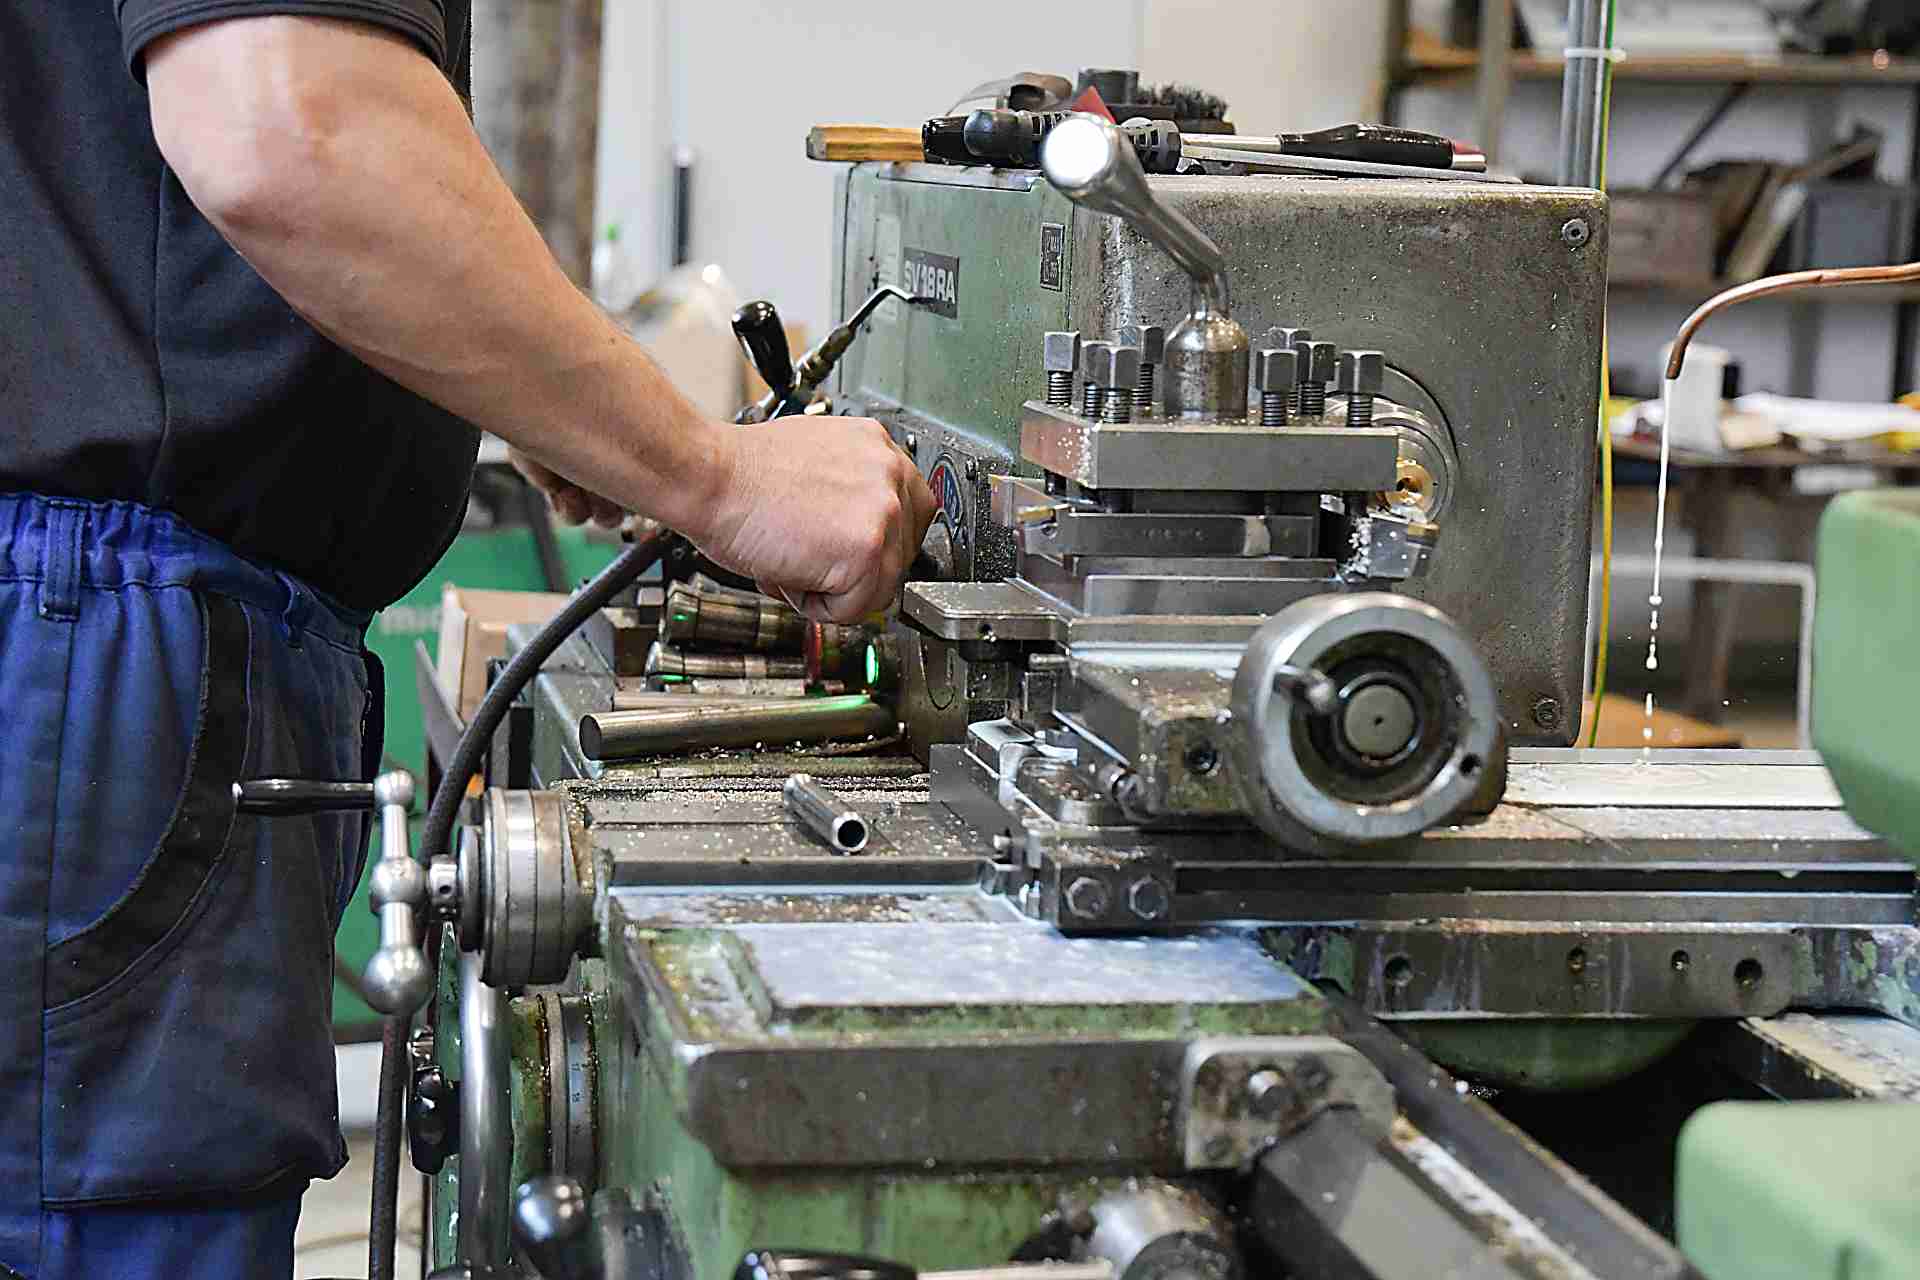 Turning on a conventional lathe